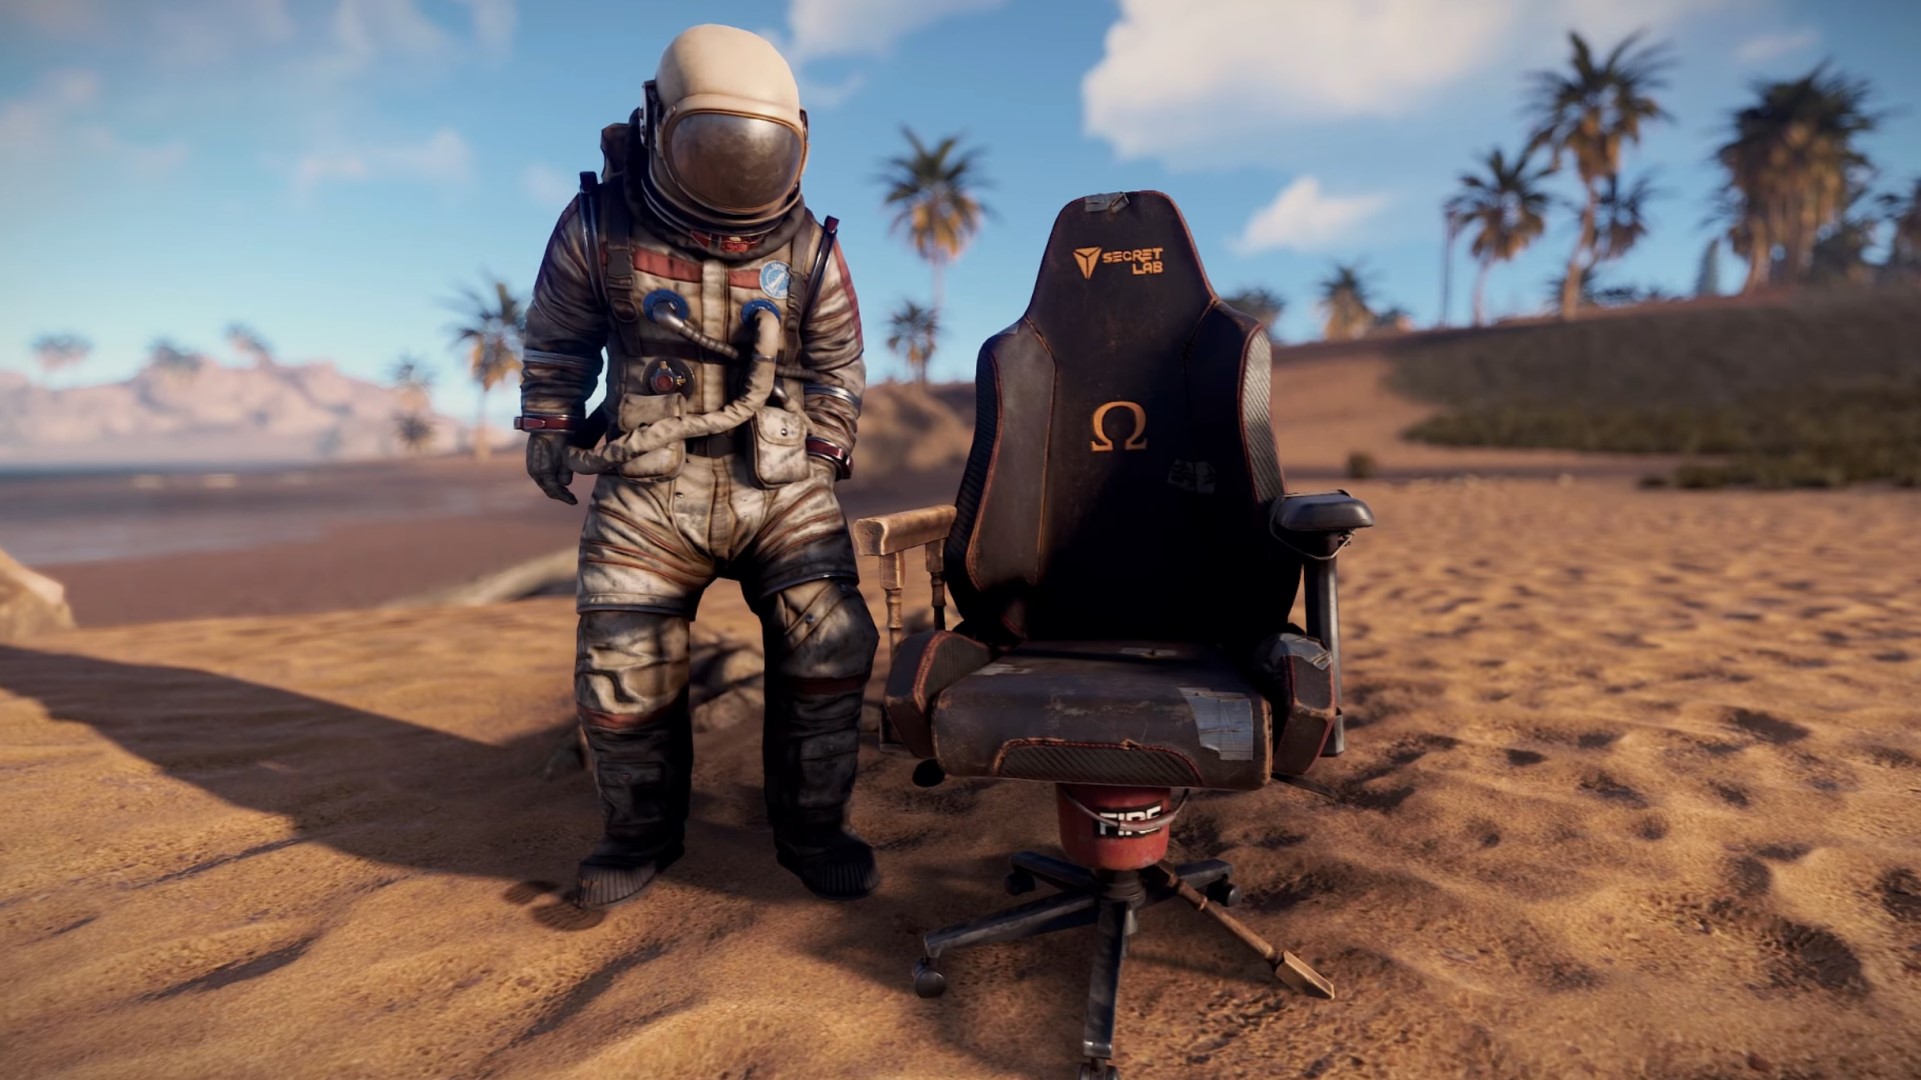 Rust is getting a space suit and an ingame gaming chair